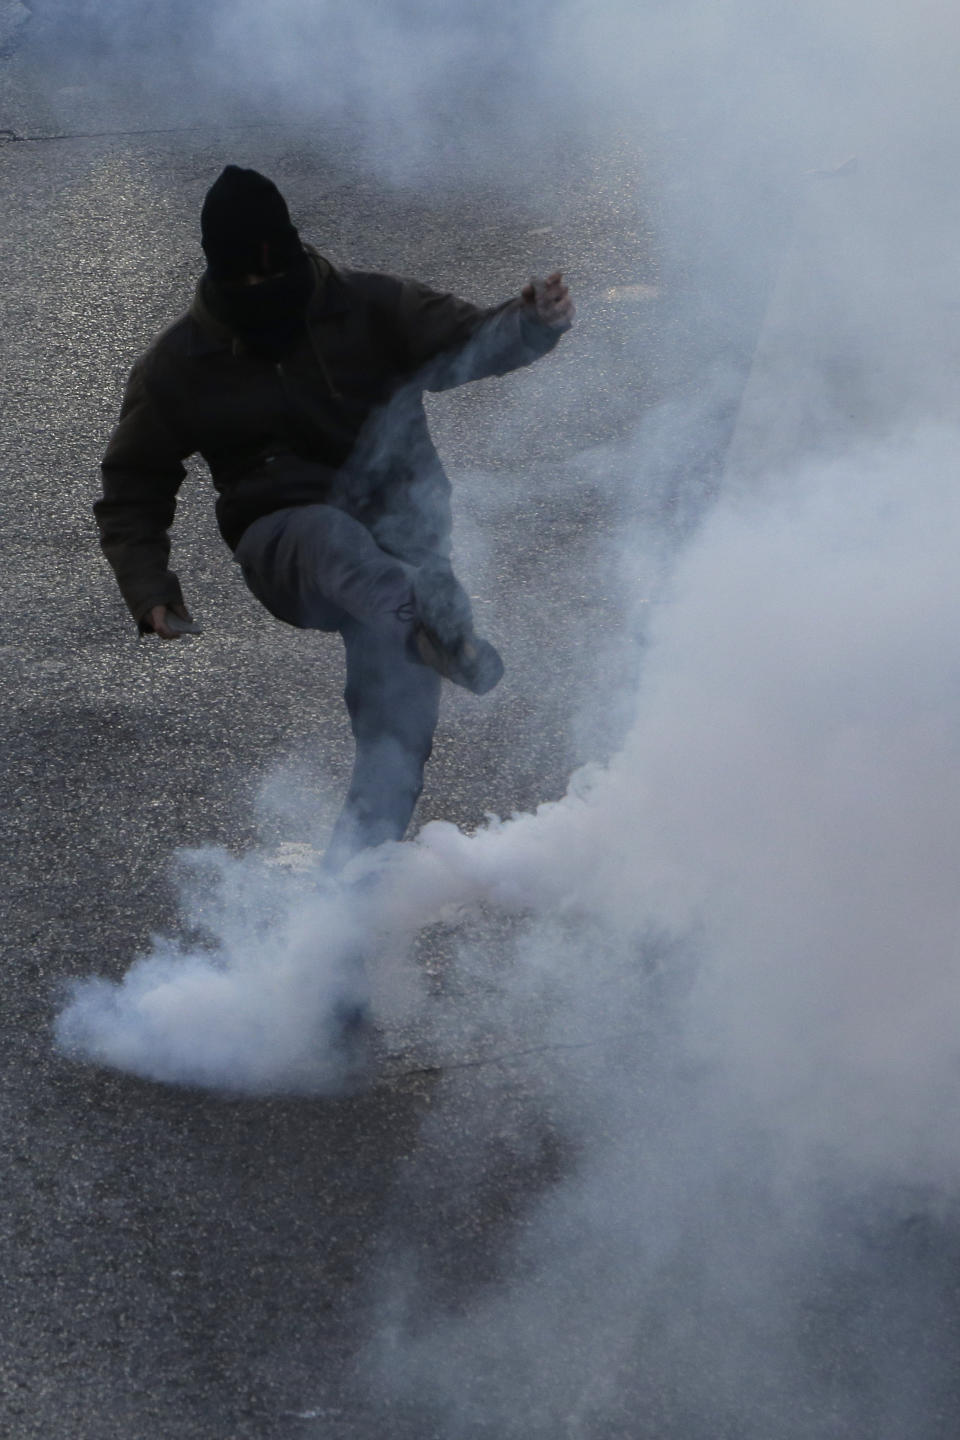 A demonstrator kicks a tear gas during during a protest Saturday, Jan. 19, 2019 in Marseille, southern France. Thousands of yellow vest protesters rallied Saturday in several French cities for a 10th consecutive weekend, despite a national debate launched this week by President Emmanuel Macron aimed at assuaging their anger. (AP Photo/Claude Paris)